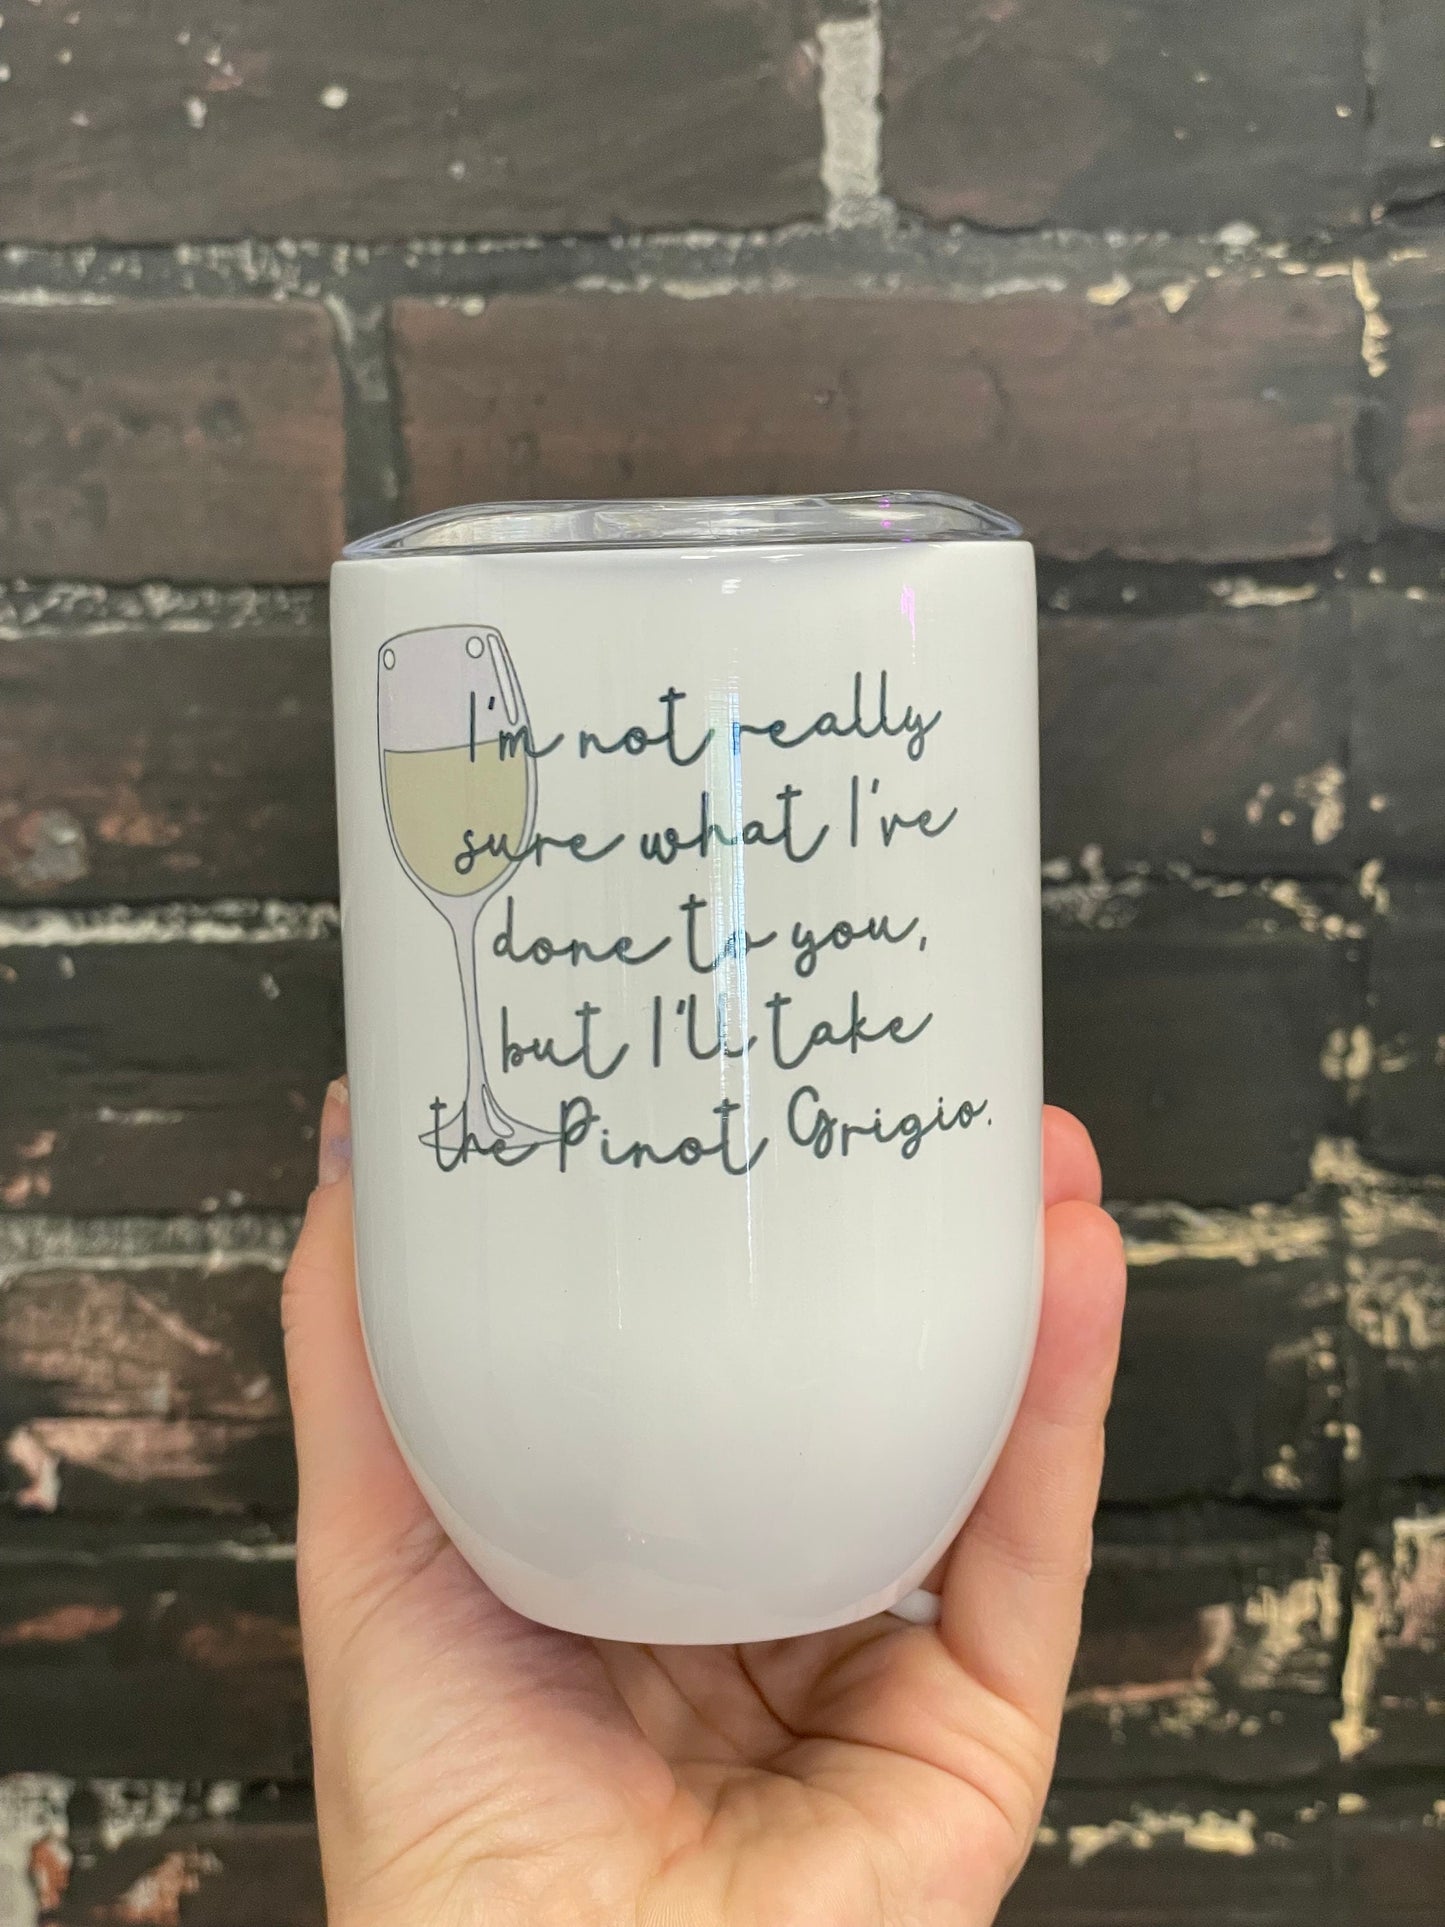 I'll Take a Pinot Grigio - Funny Stassi Schroeder - Vanderpump Rules 12oz Stainless Steel Wine Travel Tumbler